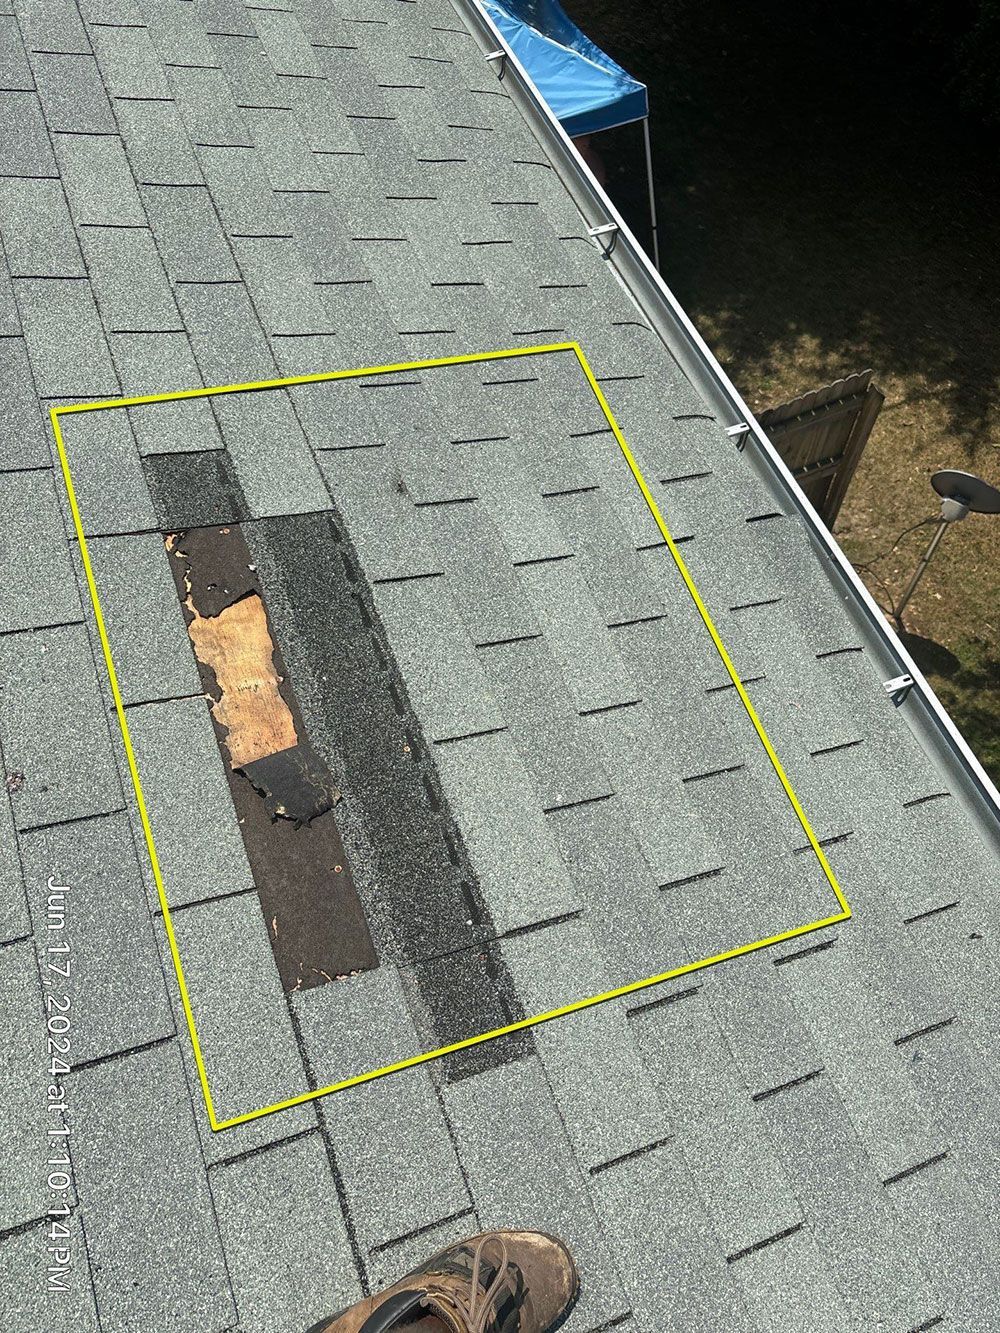 An on-going roof repair